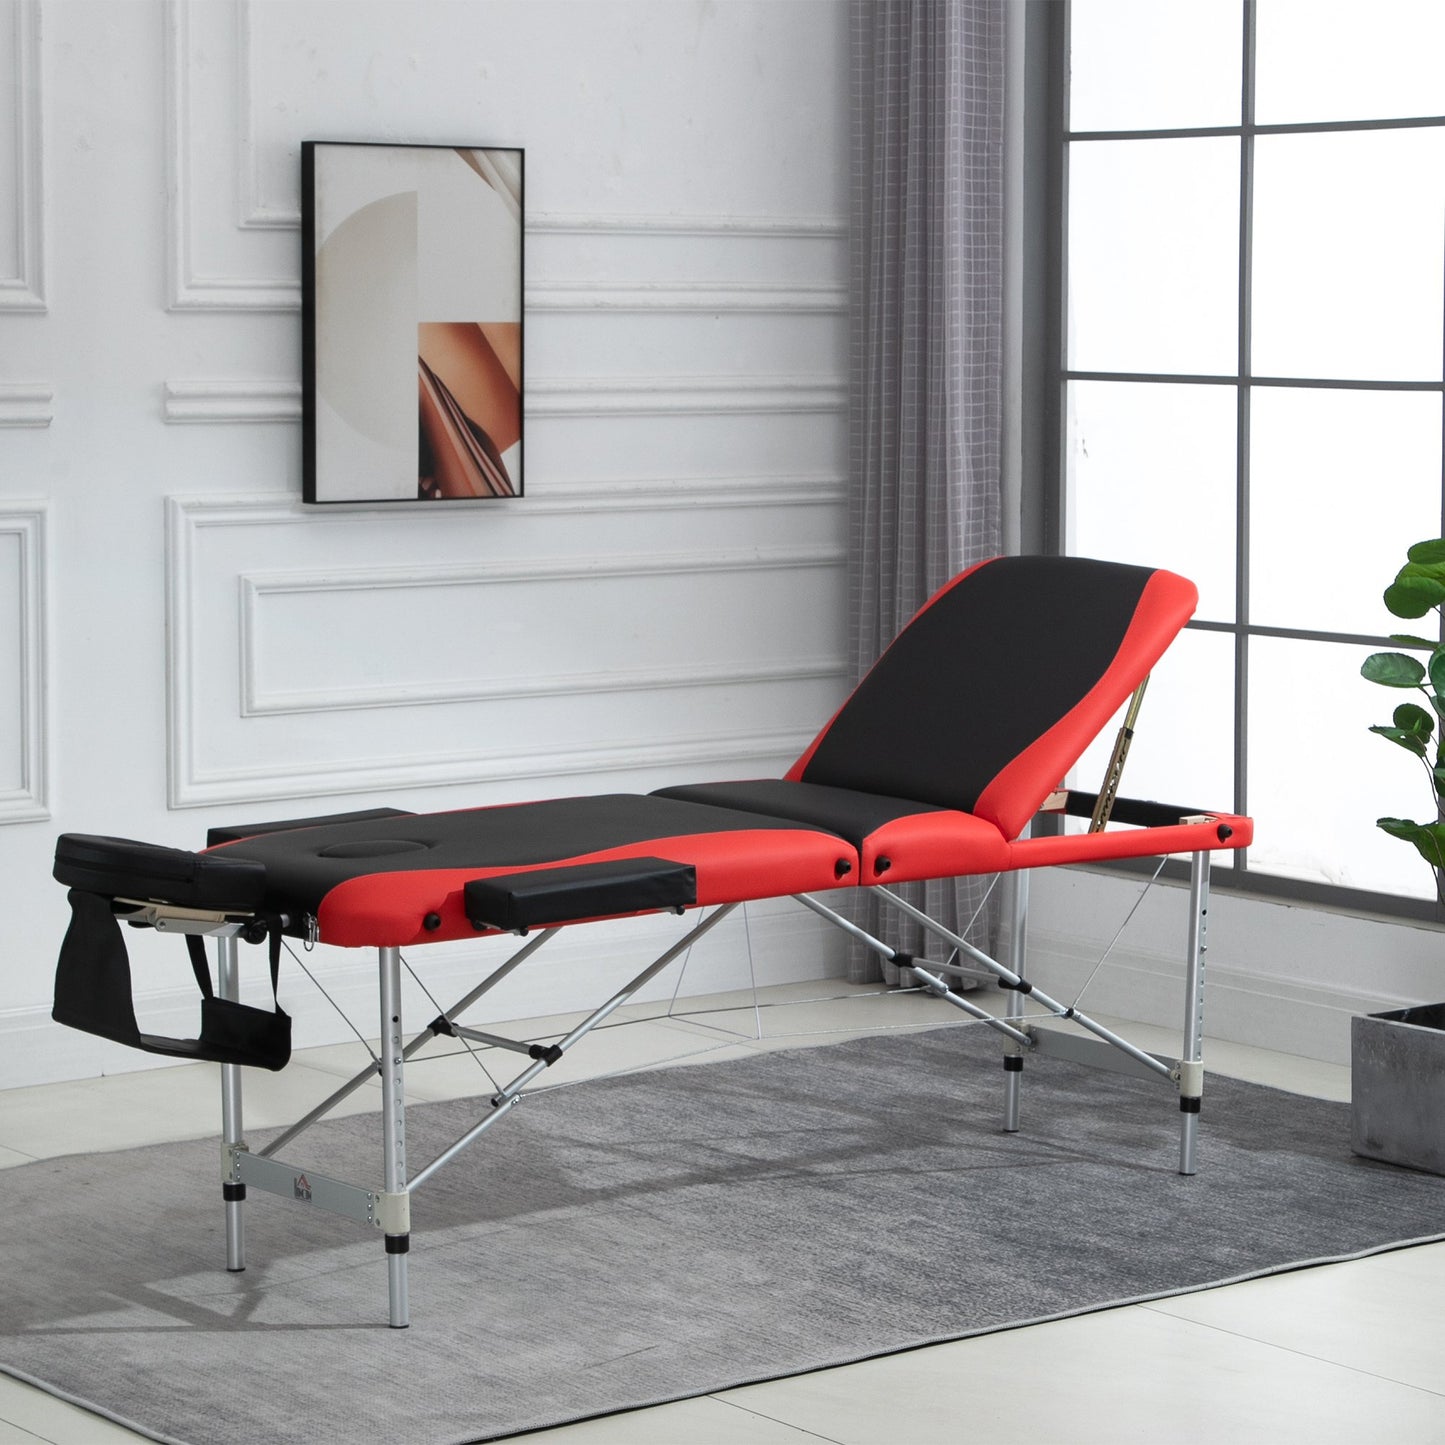 HOMCOM Professional Portable Massage Table Beauty Bed W/ Headrest - Black/Red